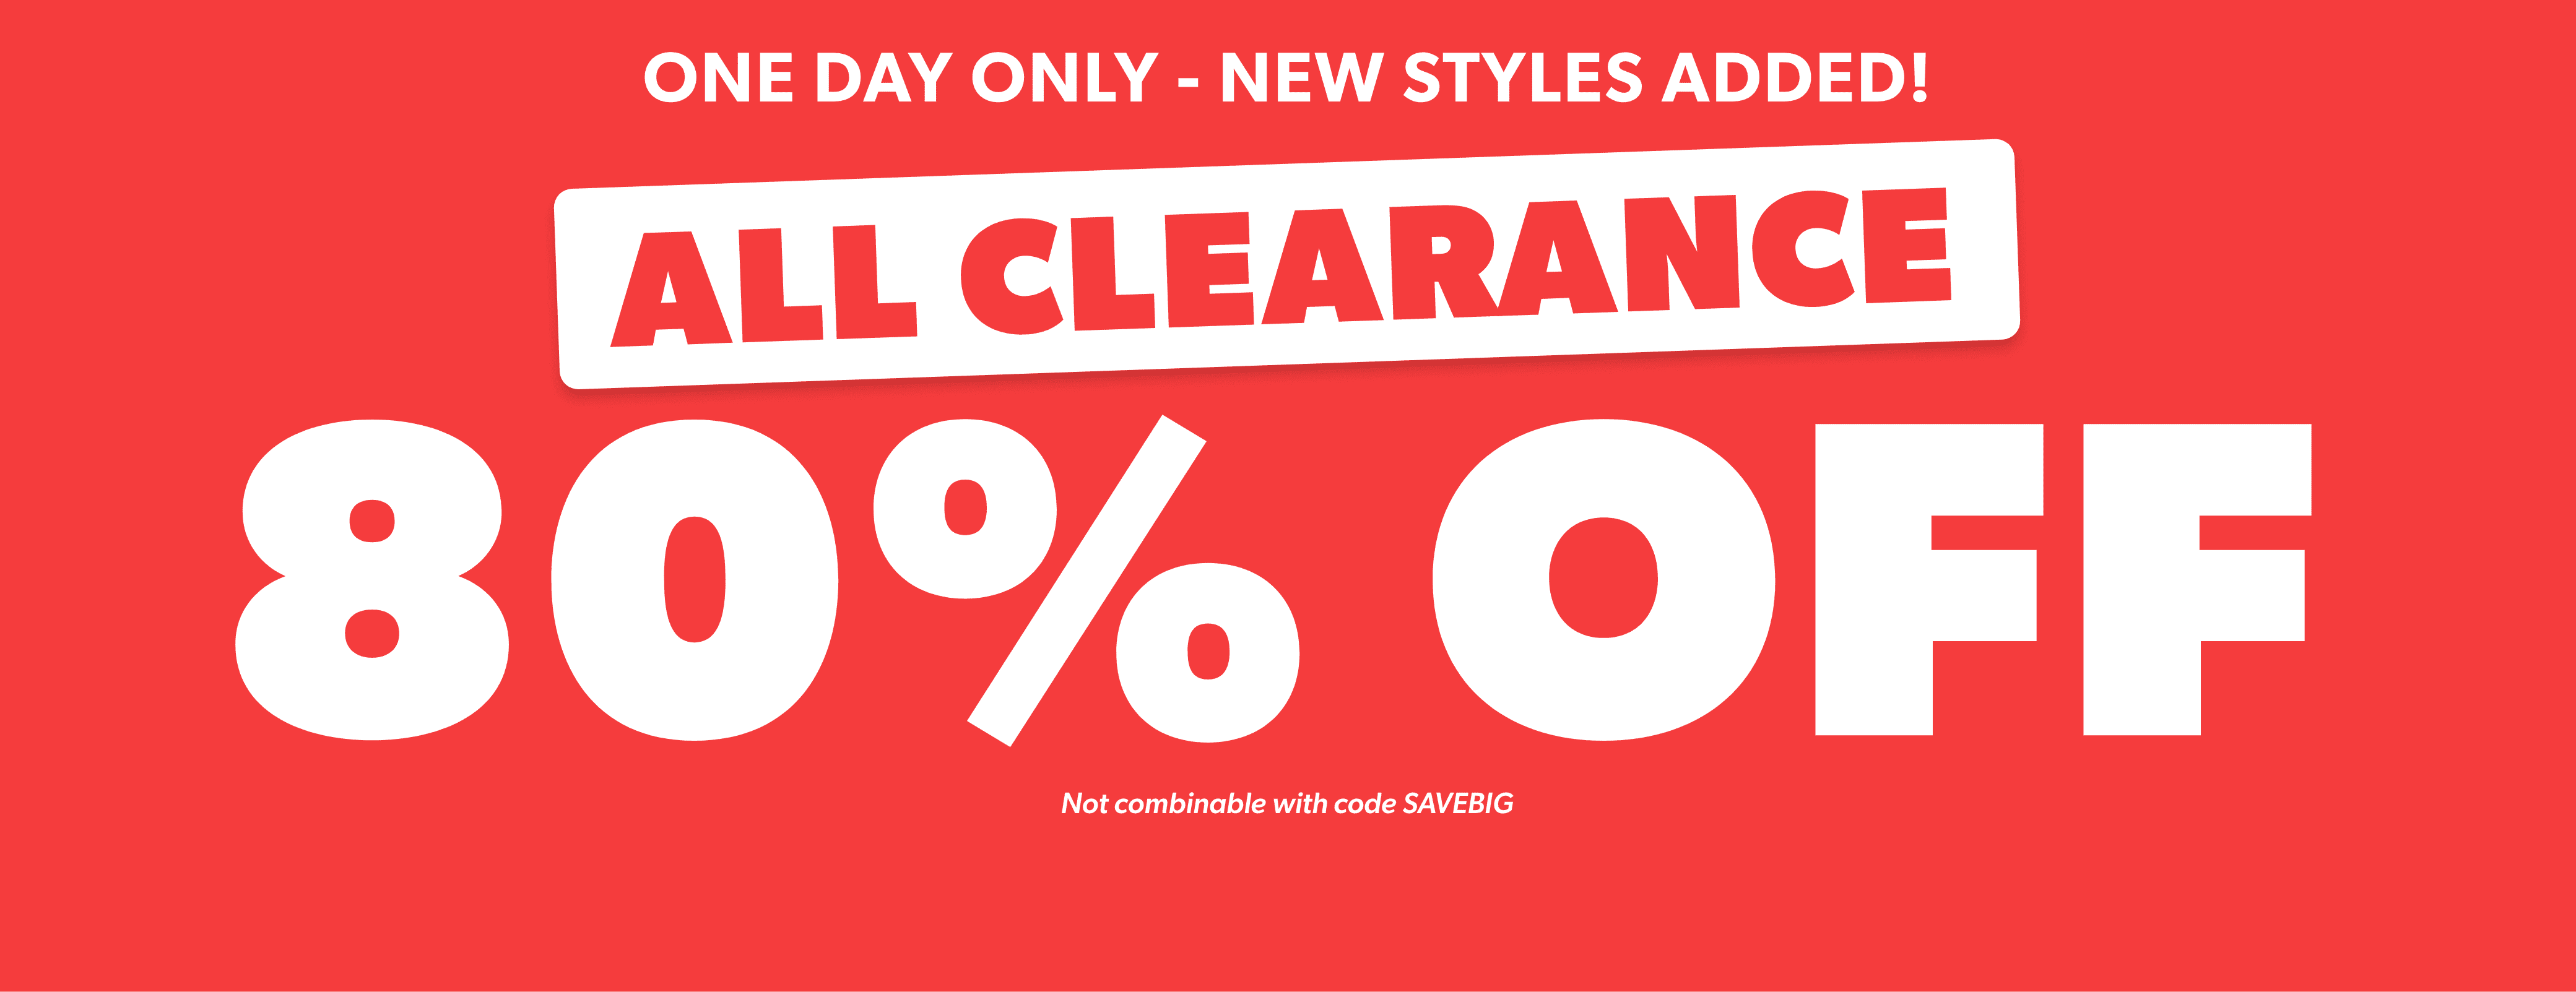 One Day Only! ALL CLEARANCE 80% Off Not combinable with code SAVEBIG